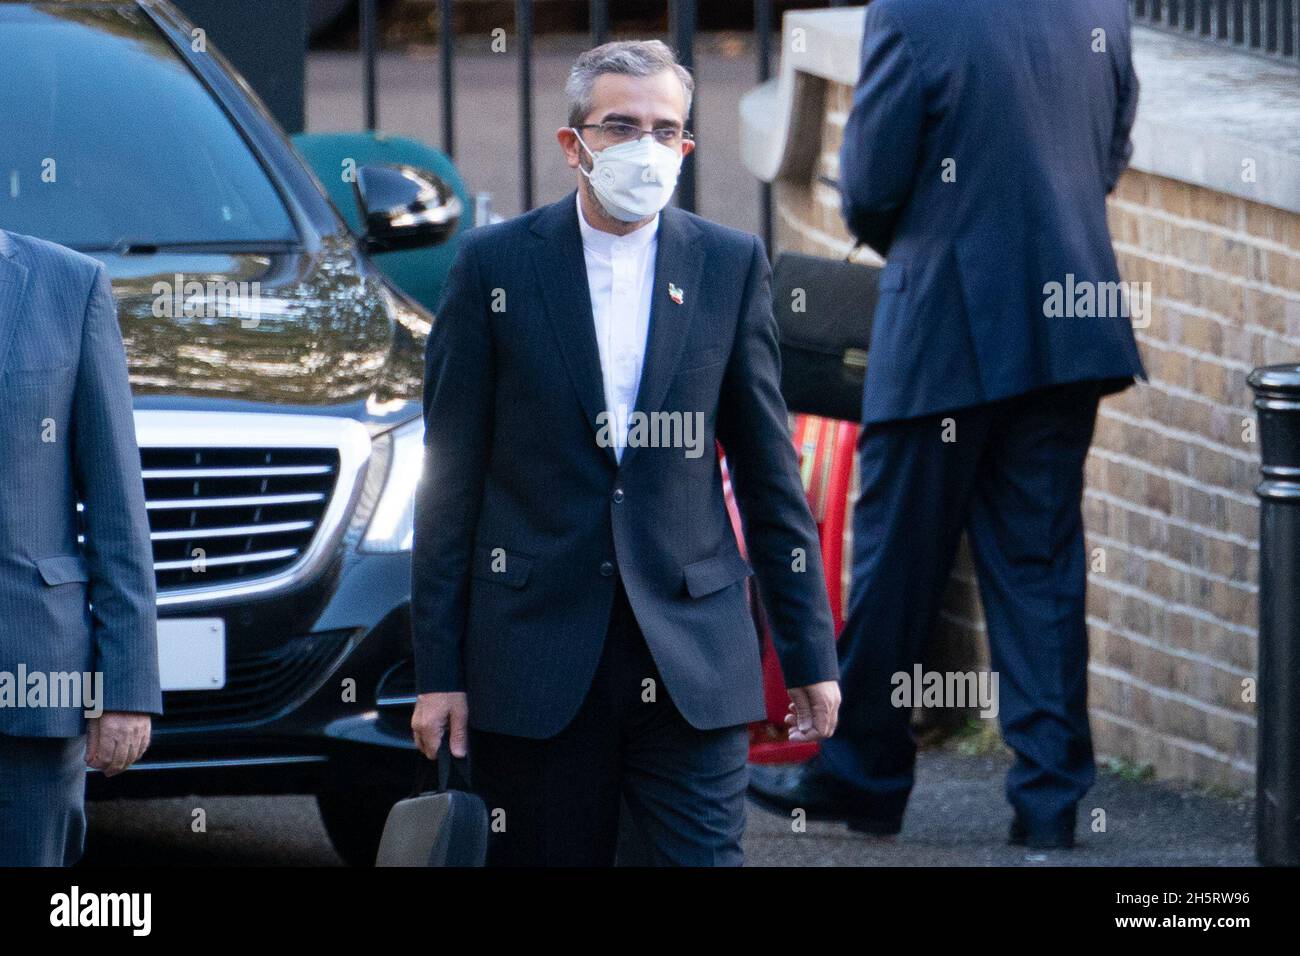 Iranian deputy foreign minister Bagheri Kani arrives at the Foreign, Commonwealth and Development Office (FCDO) in Westminster, central London, ahead of a meeting with officials, who are set to urge Iran to conclude the Joint Comprehensive Plan of Action (JCPoA) deal and press for the immediate release of unfairly detained British nationals. Picture date: Thursday November 11, 2021. Stock Photo